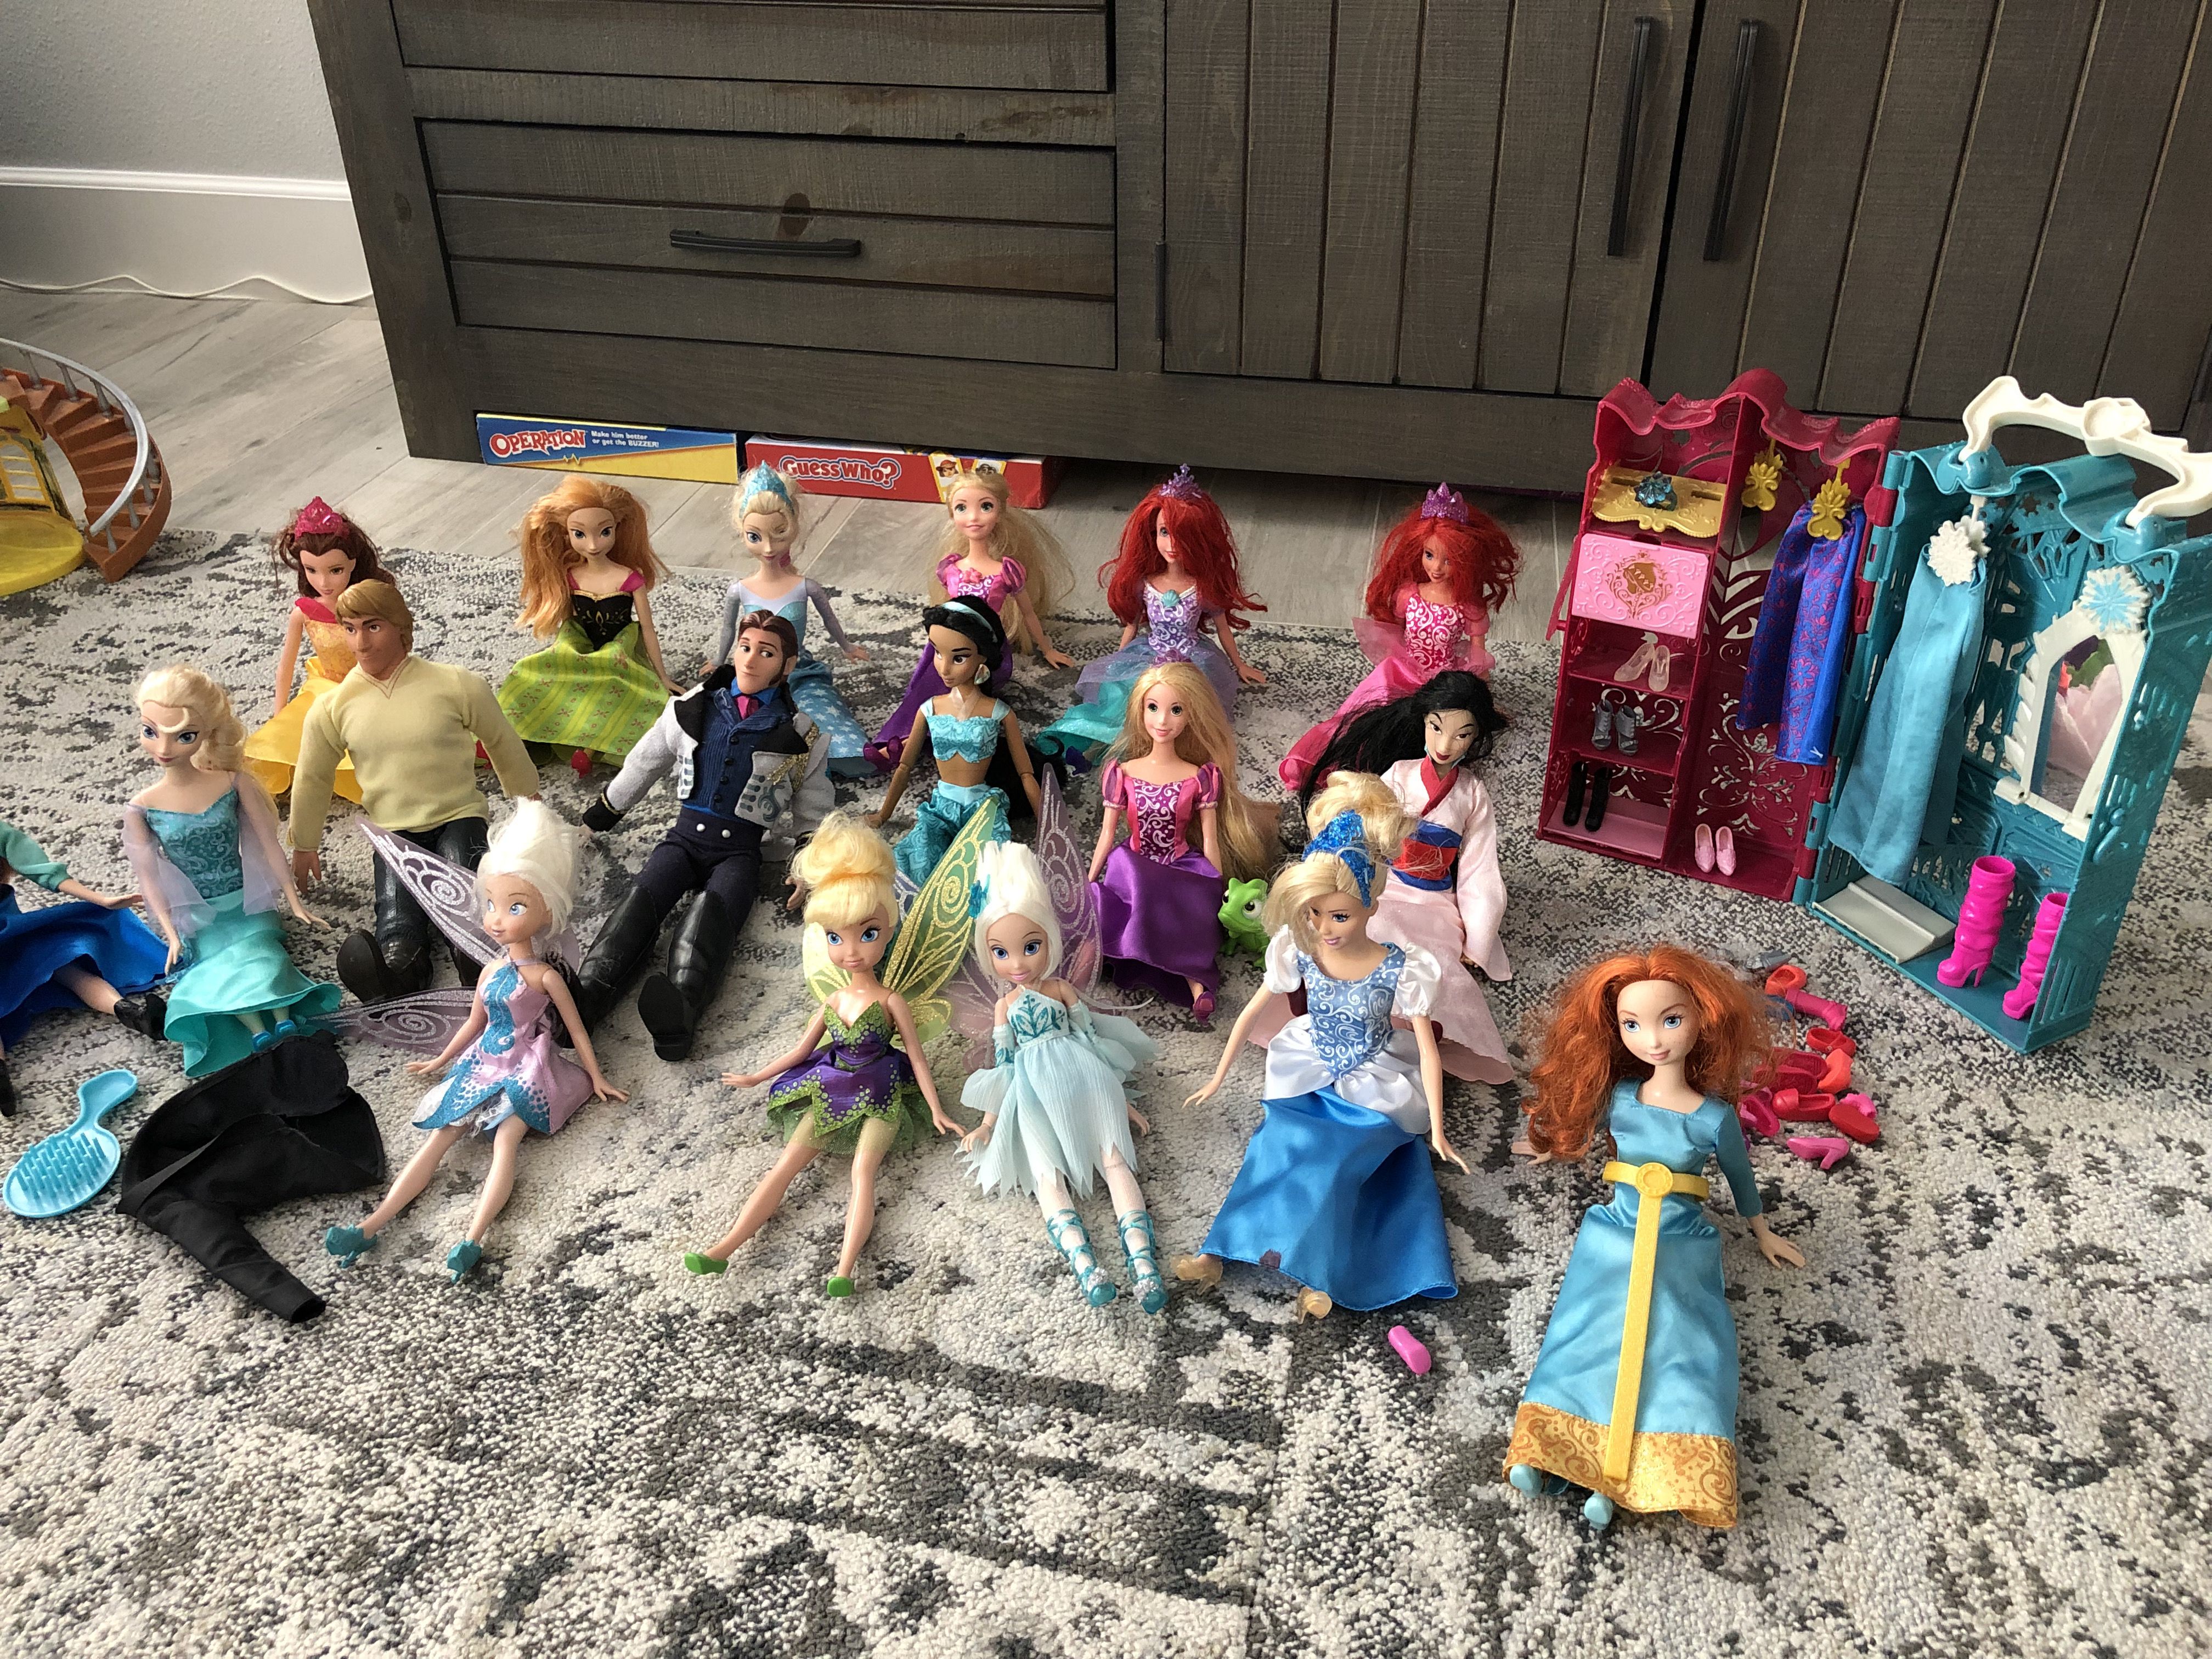 18 Doll set of Disney Princess 12 inch dolls and accessories